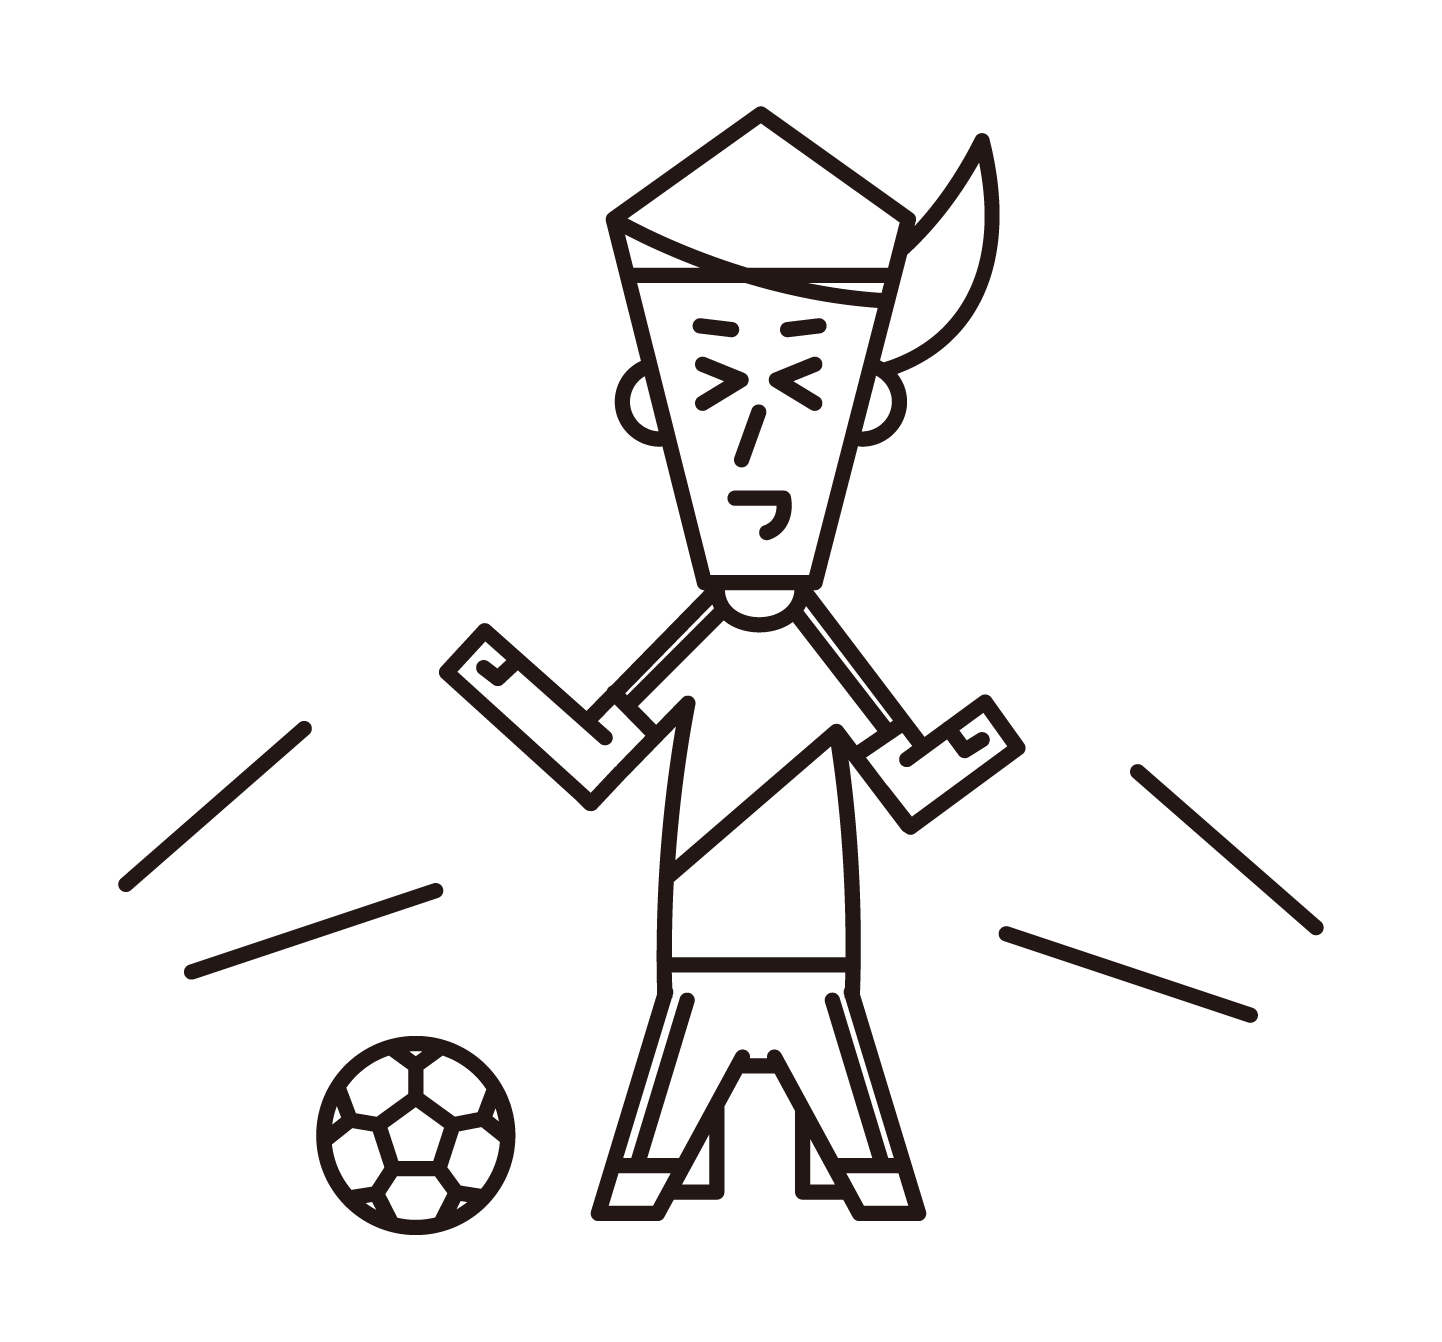 Illustration of a soccer player (female) performing a goal